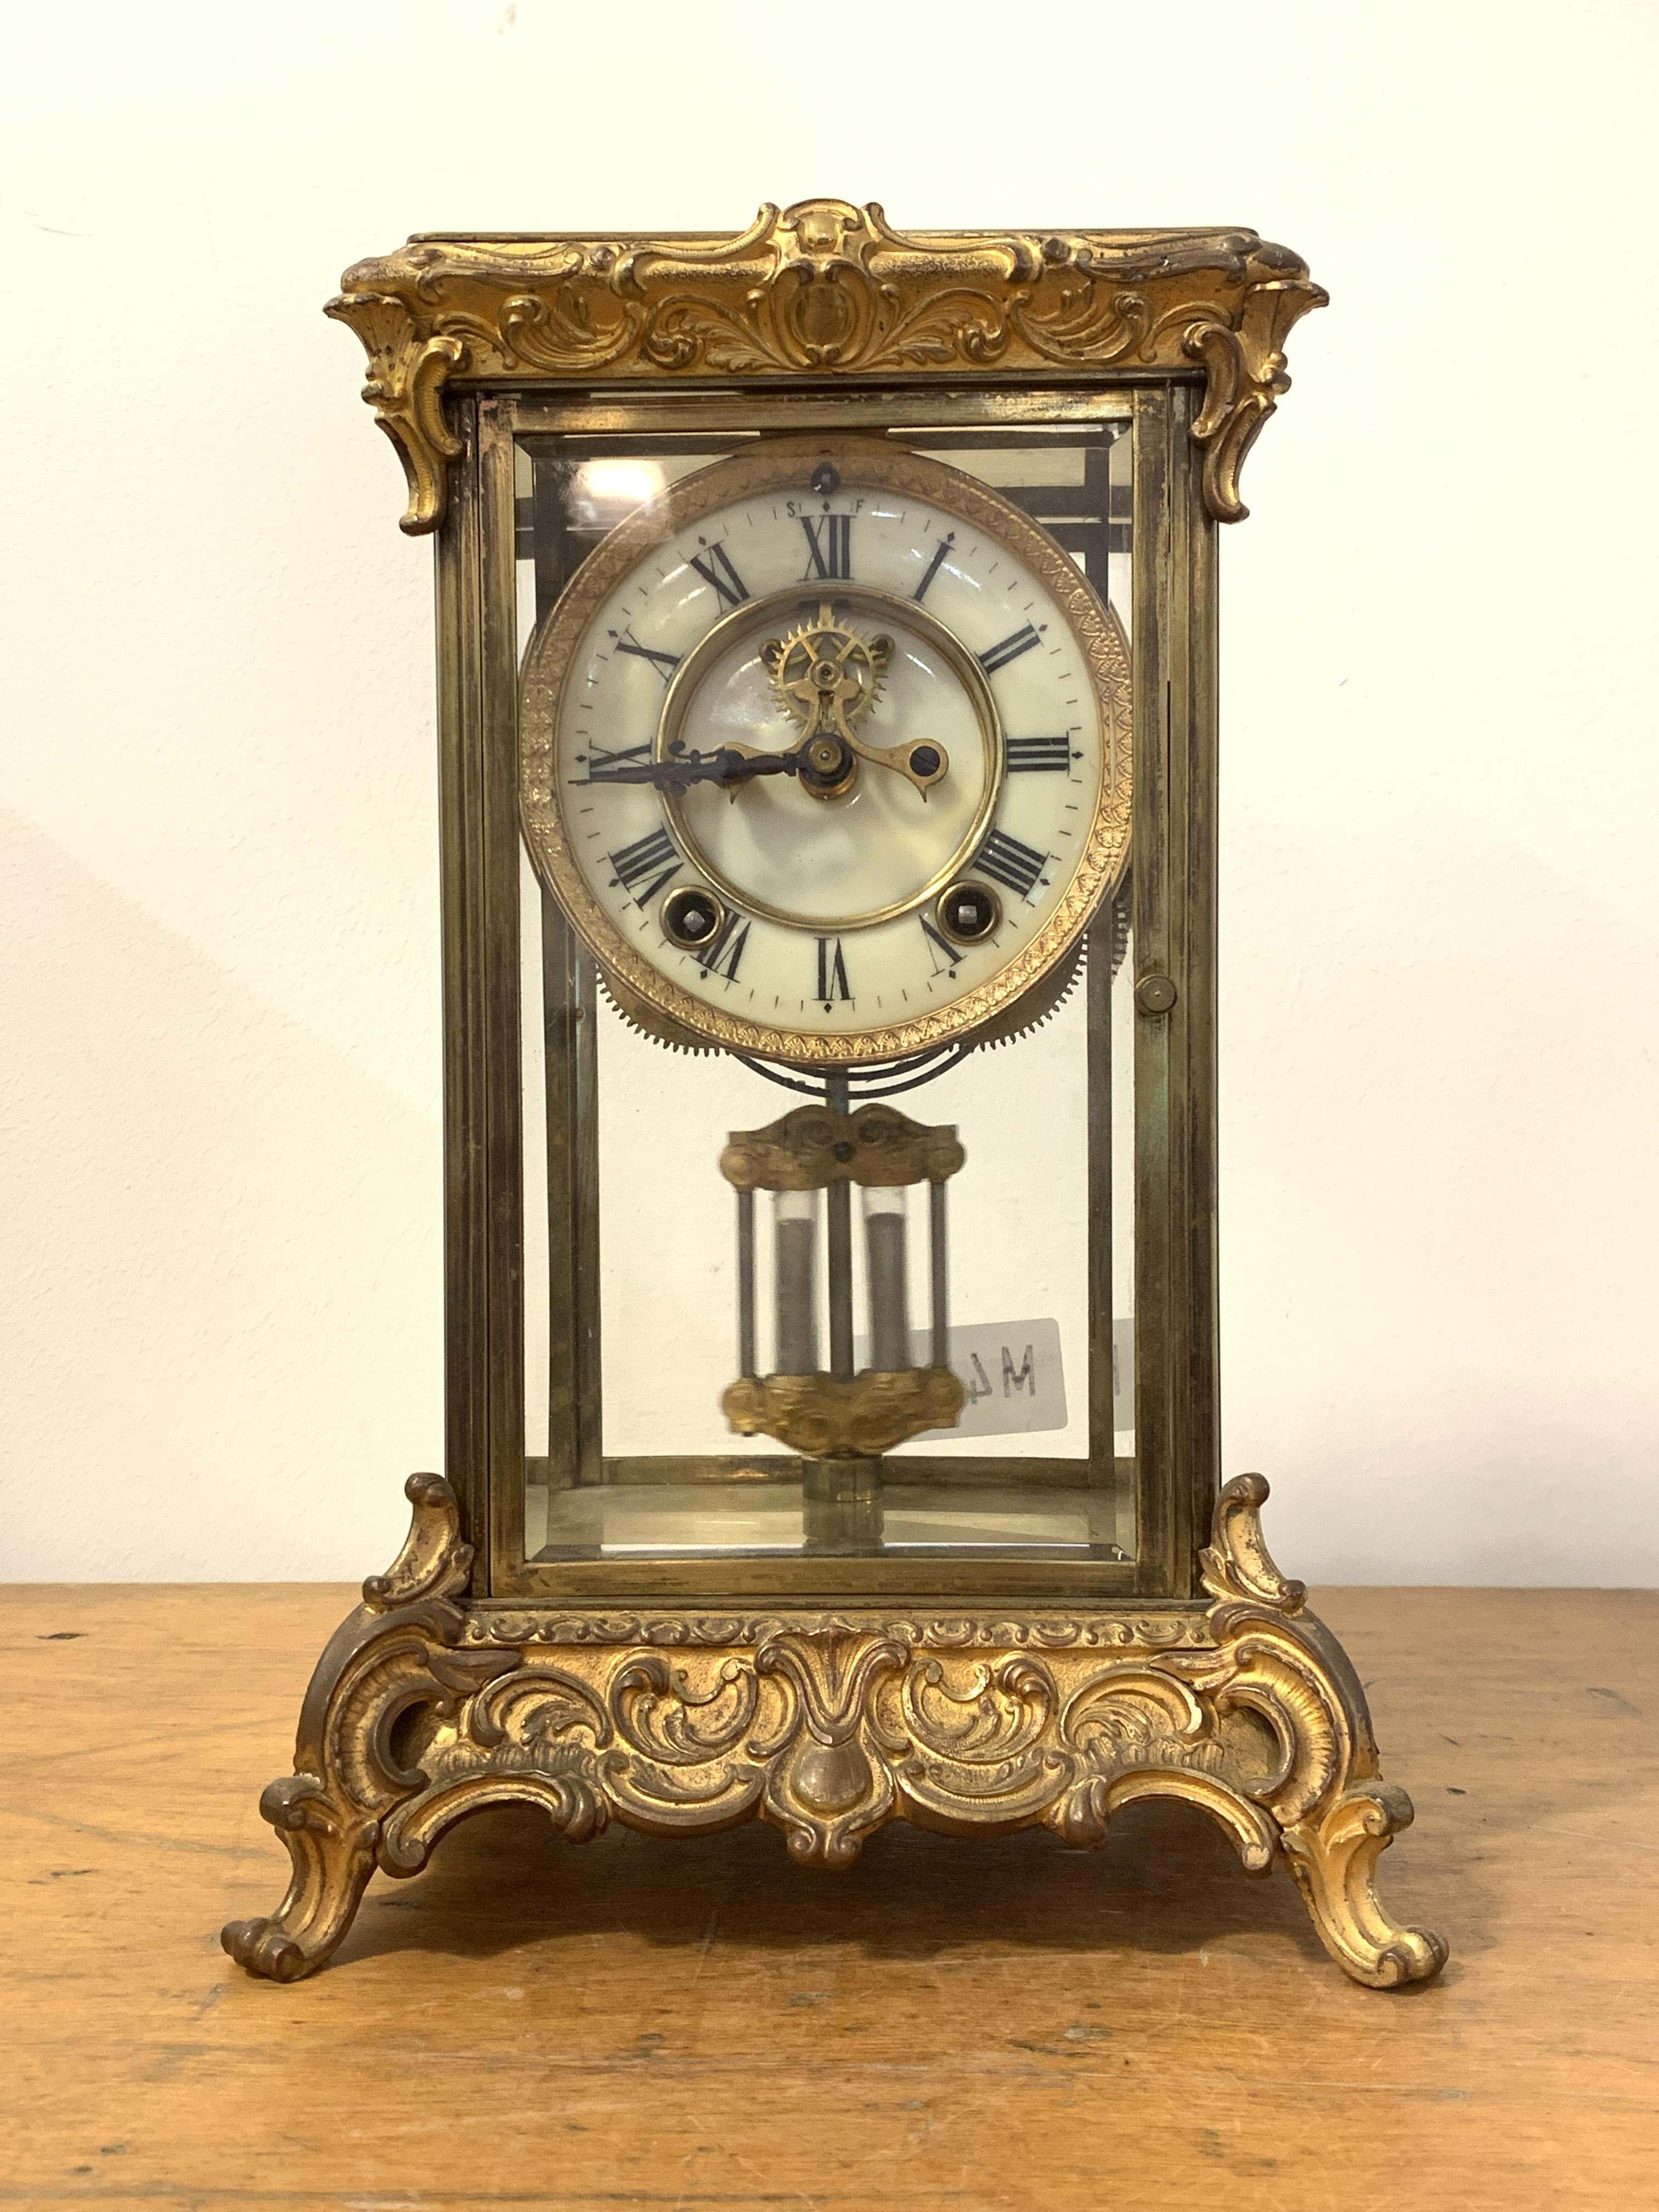 An Early 20th century four glass presentation clock, the cast brass case with 's' scrolls in the